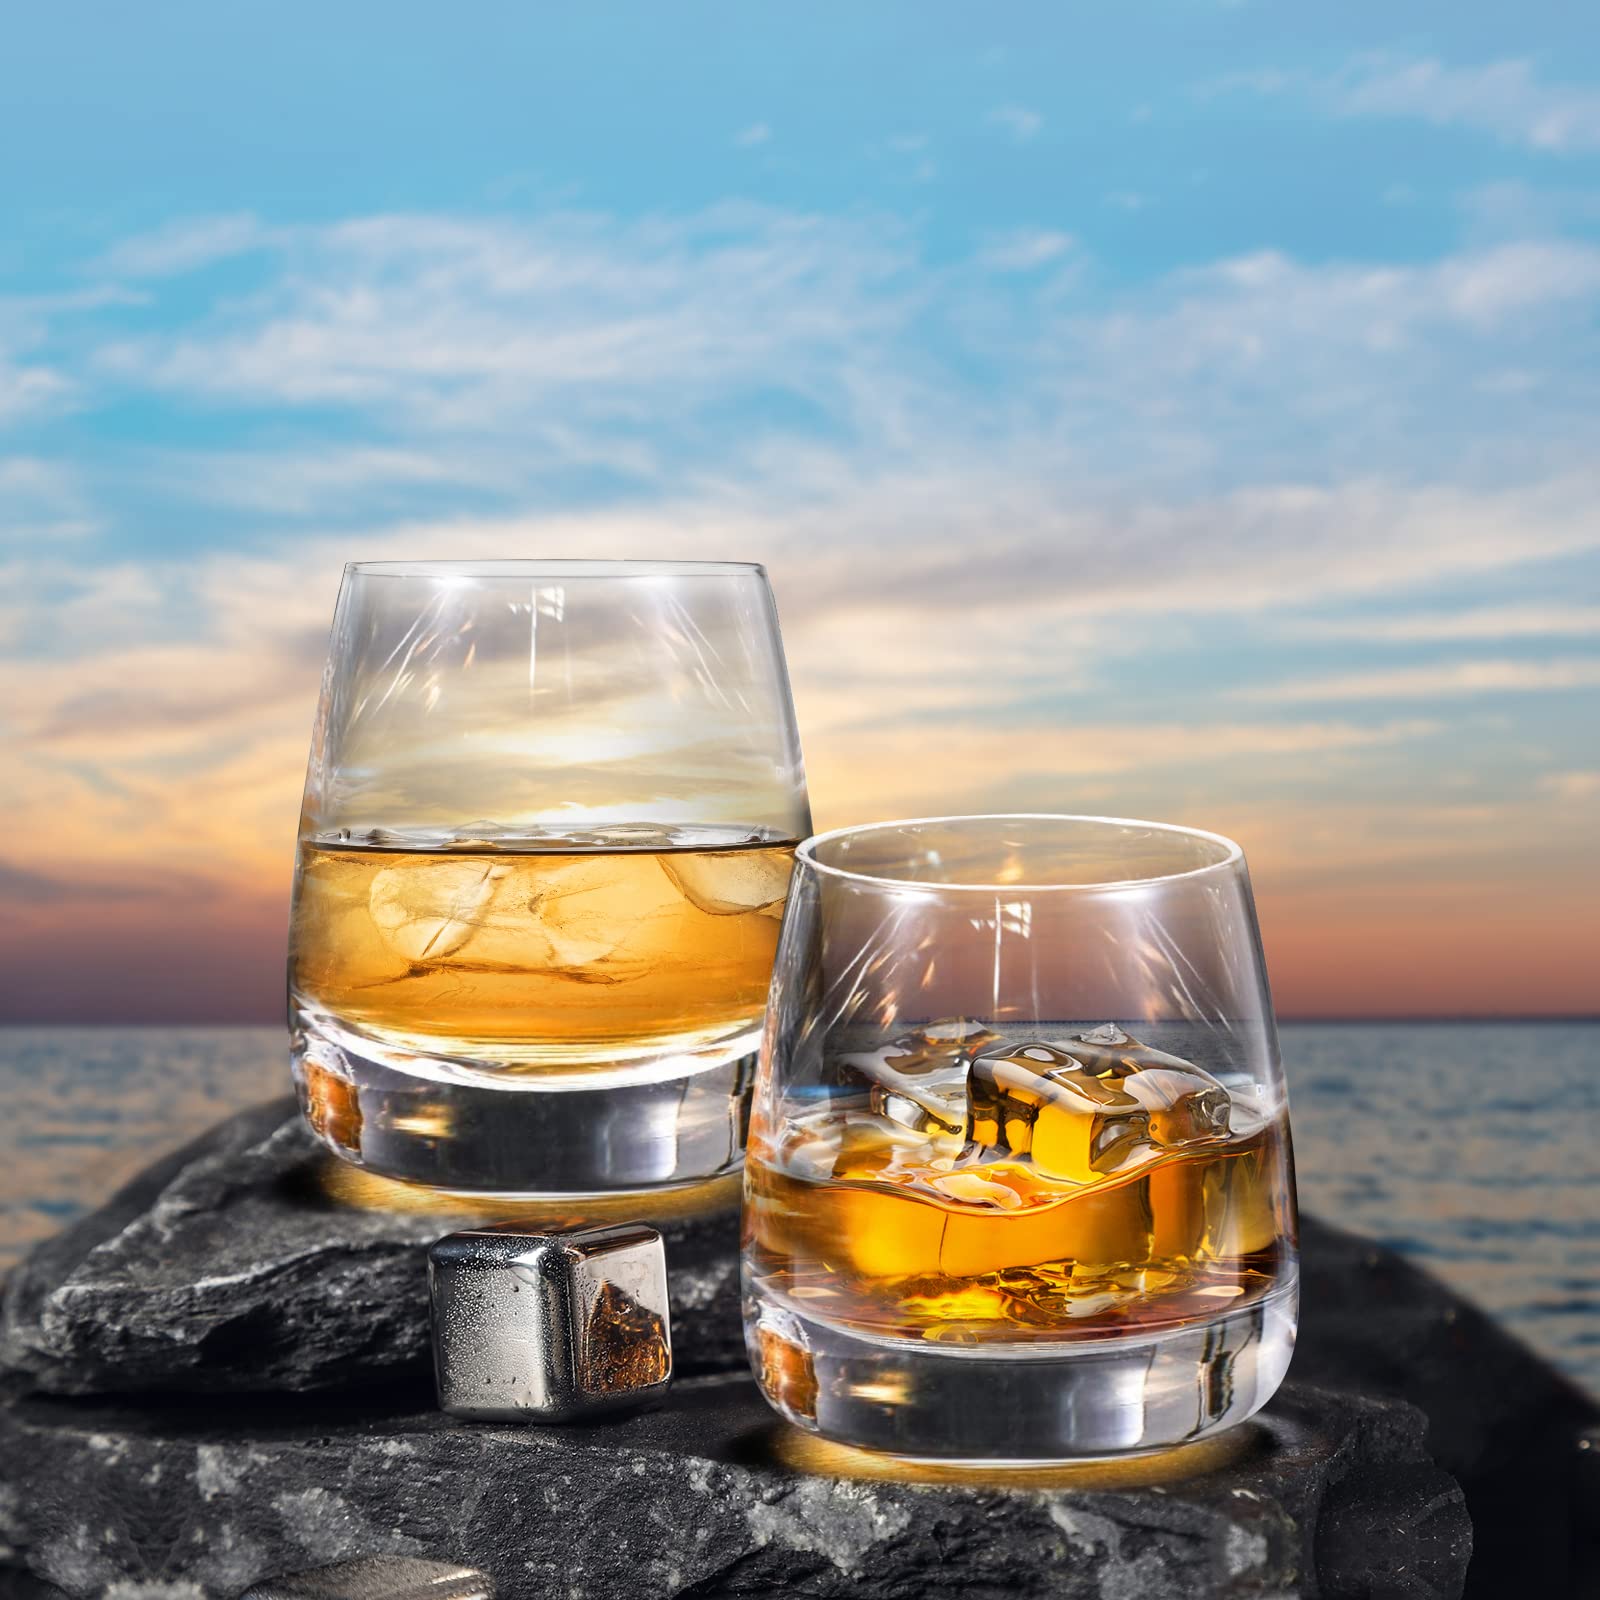 Ohnijalit Crystal Whiskey Glasses Premium Old Fashioned Cocktails Glasses-Thick Weighted Bottom Rocks Glasses Hand Blown Scotch Glasses Set of 2 Perfect for Cocktail, Bourbon, Scotch Manhattans